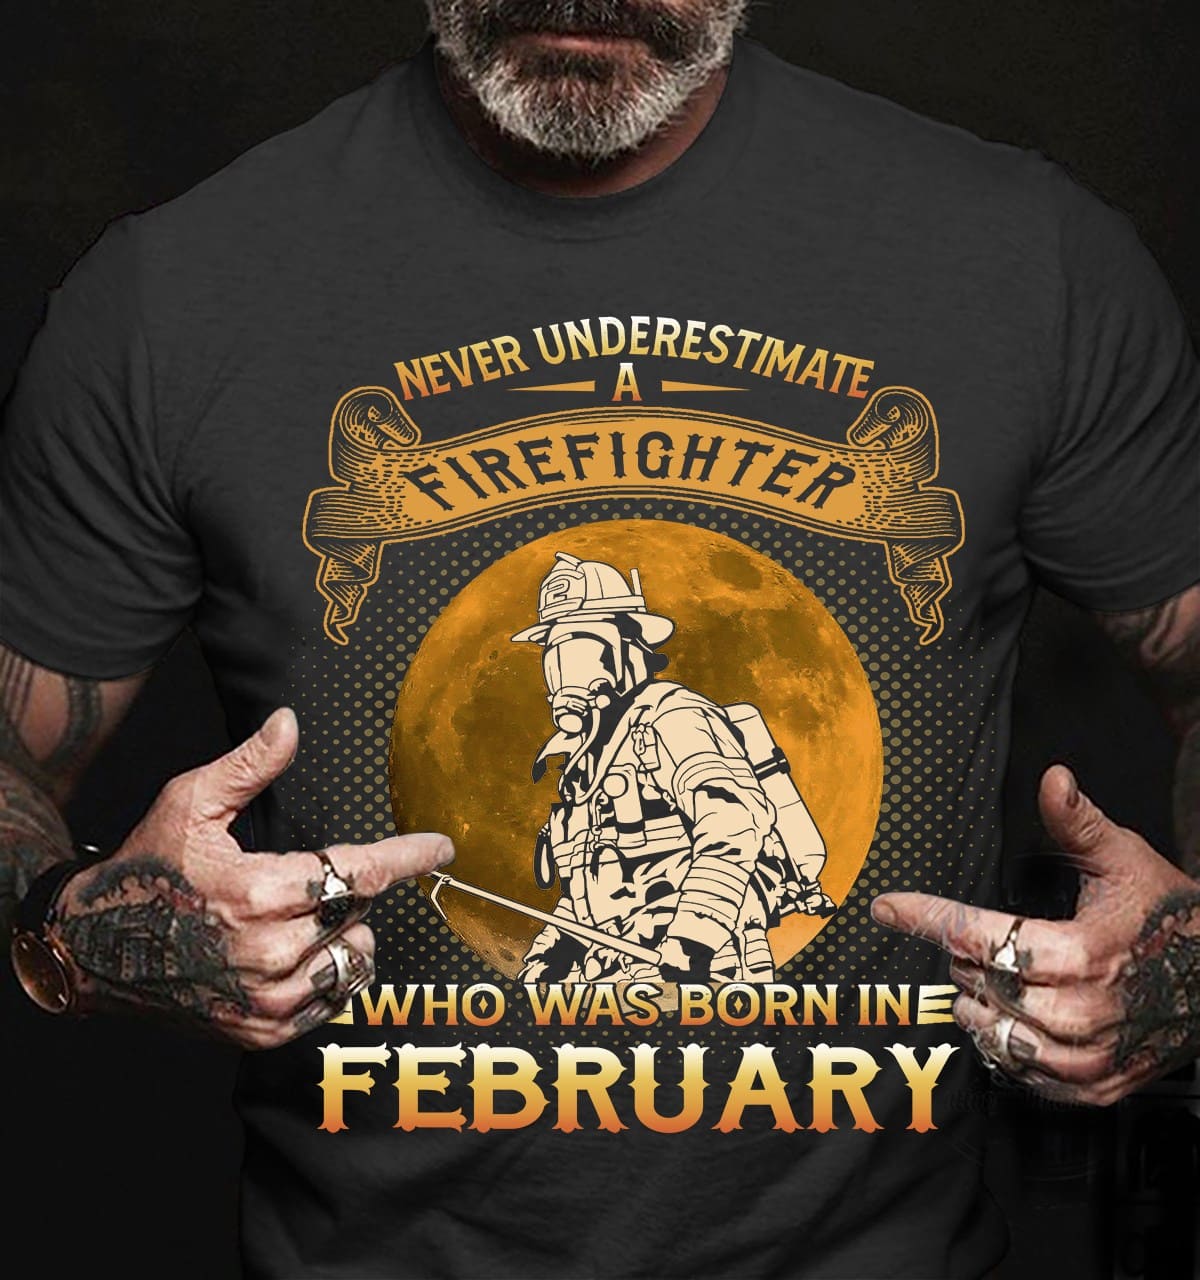 Never underestimate a firefighter who was born in February - February firefighter, firefighter lifesaver